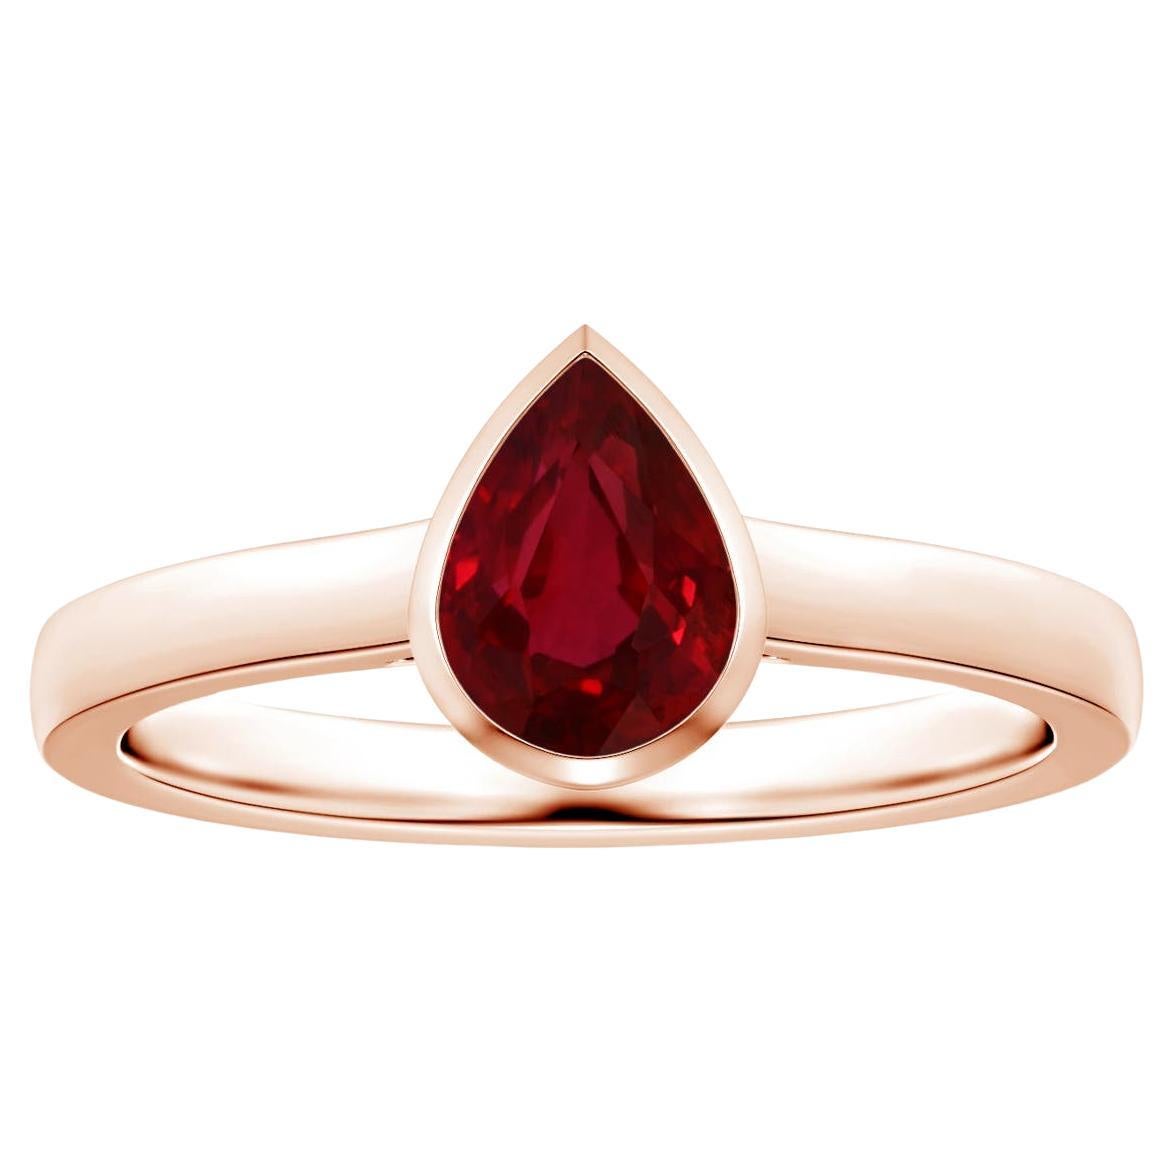 For Sale:  ANGARA Bezel-Set GIA Certified Pear-Shaped Ruby Solitaire Ring in Rose Gold